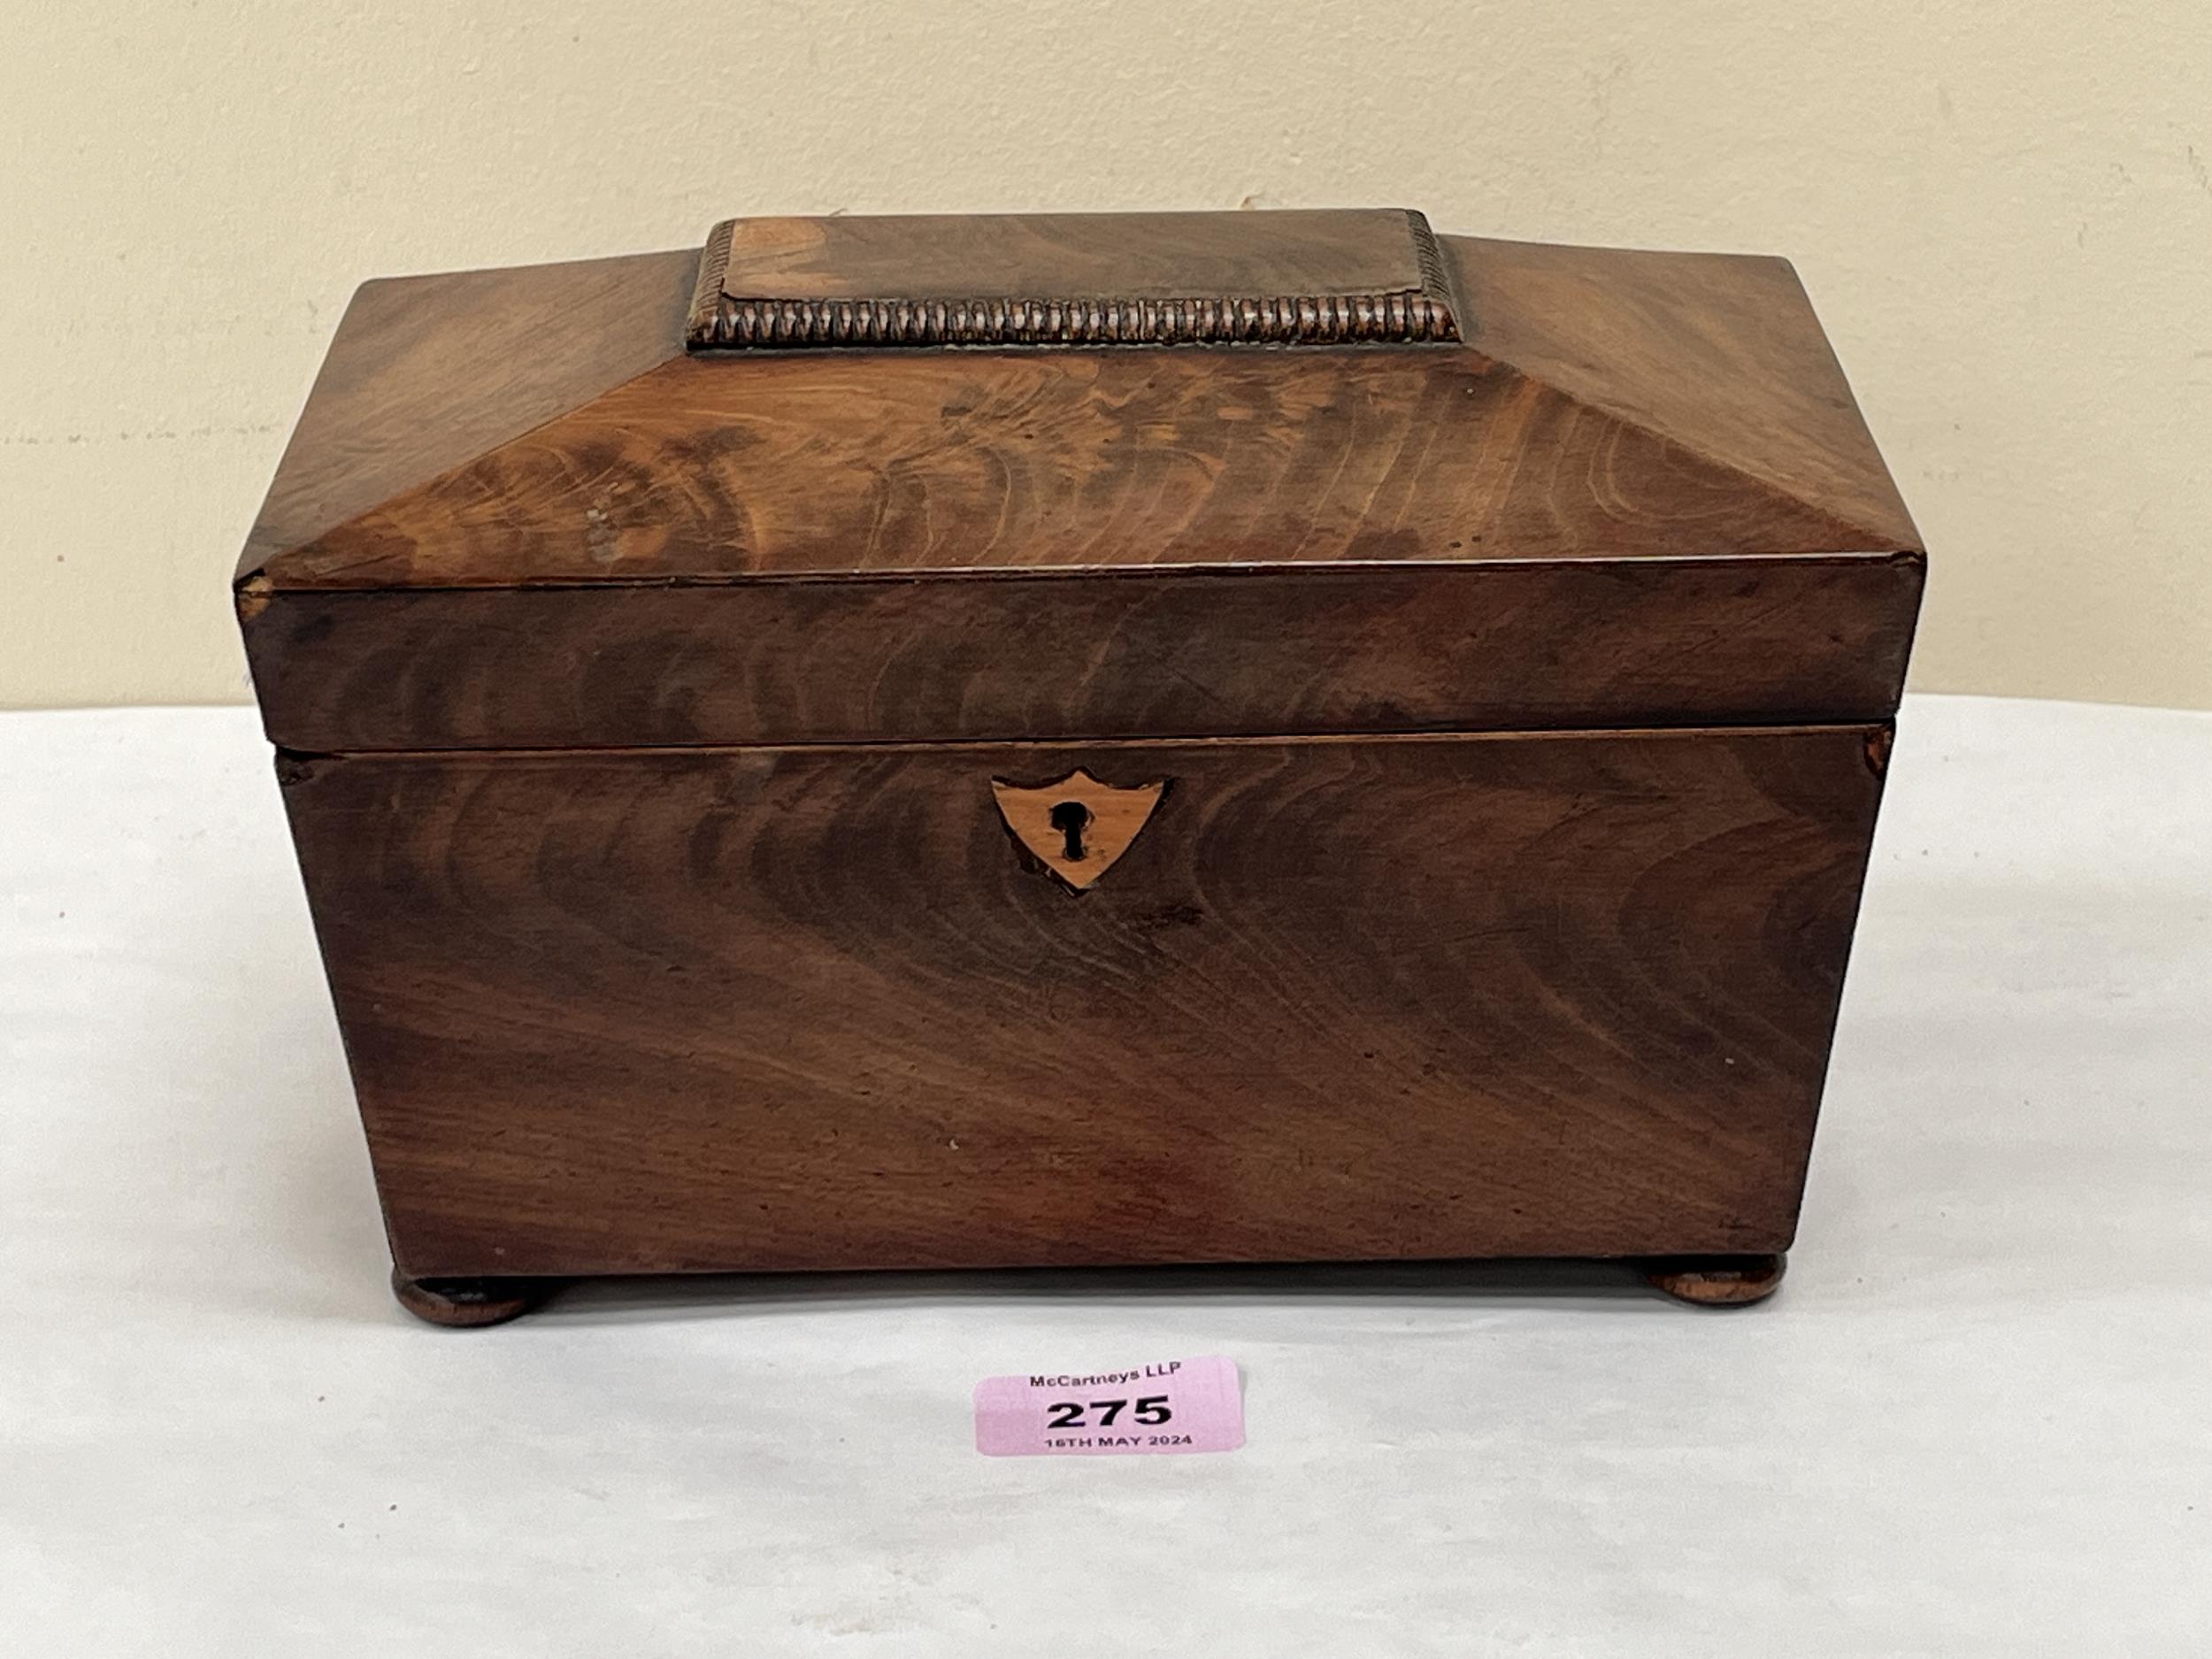 A George IV mahogany sarcophagus tea caddy. 9" wide. Interior gutted.